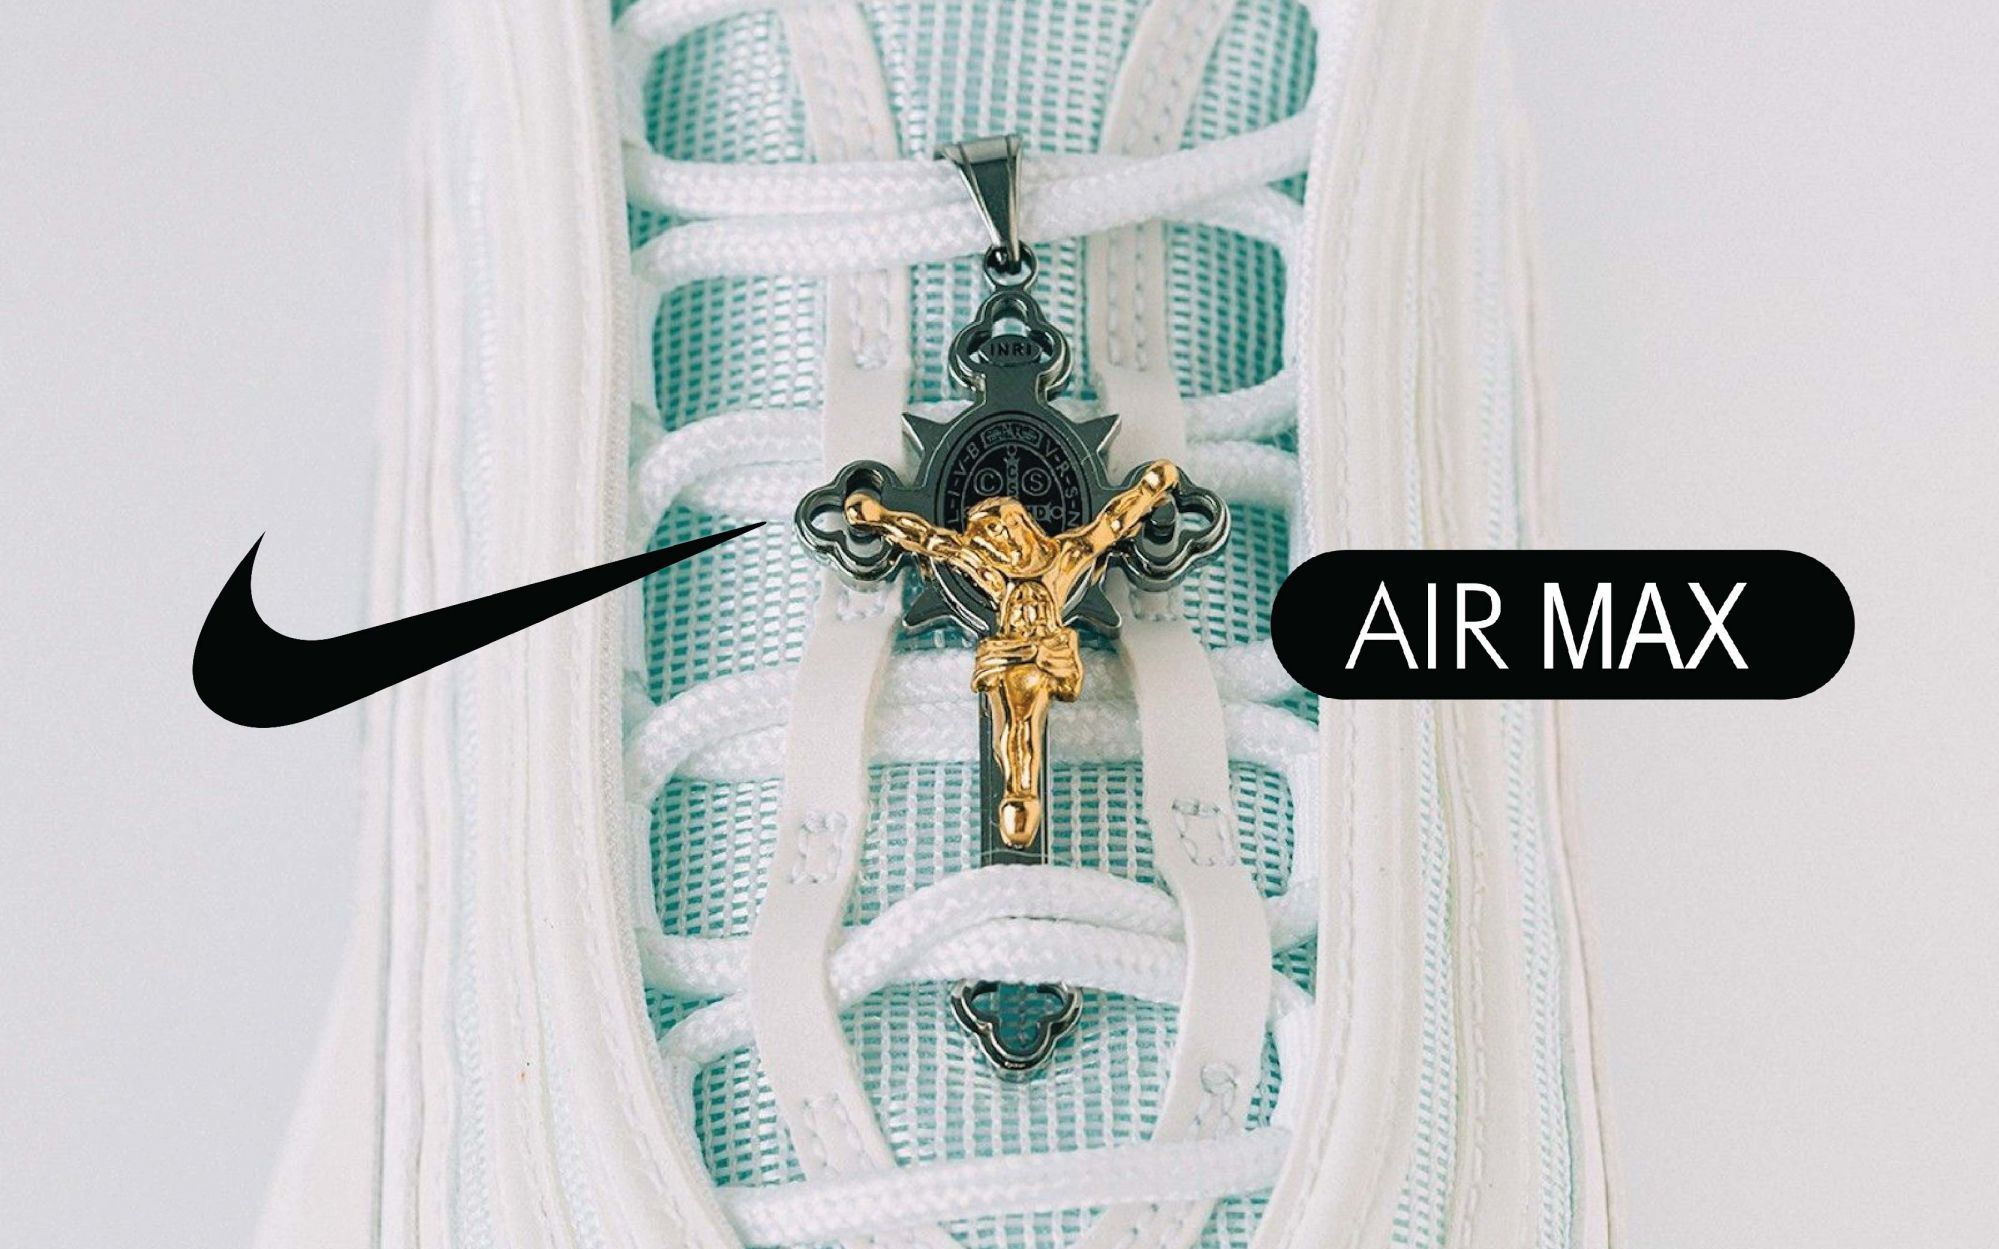 The Nike Air Max 97 with crucifix and 